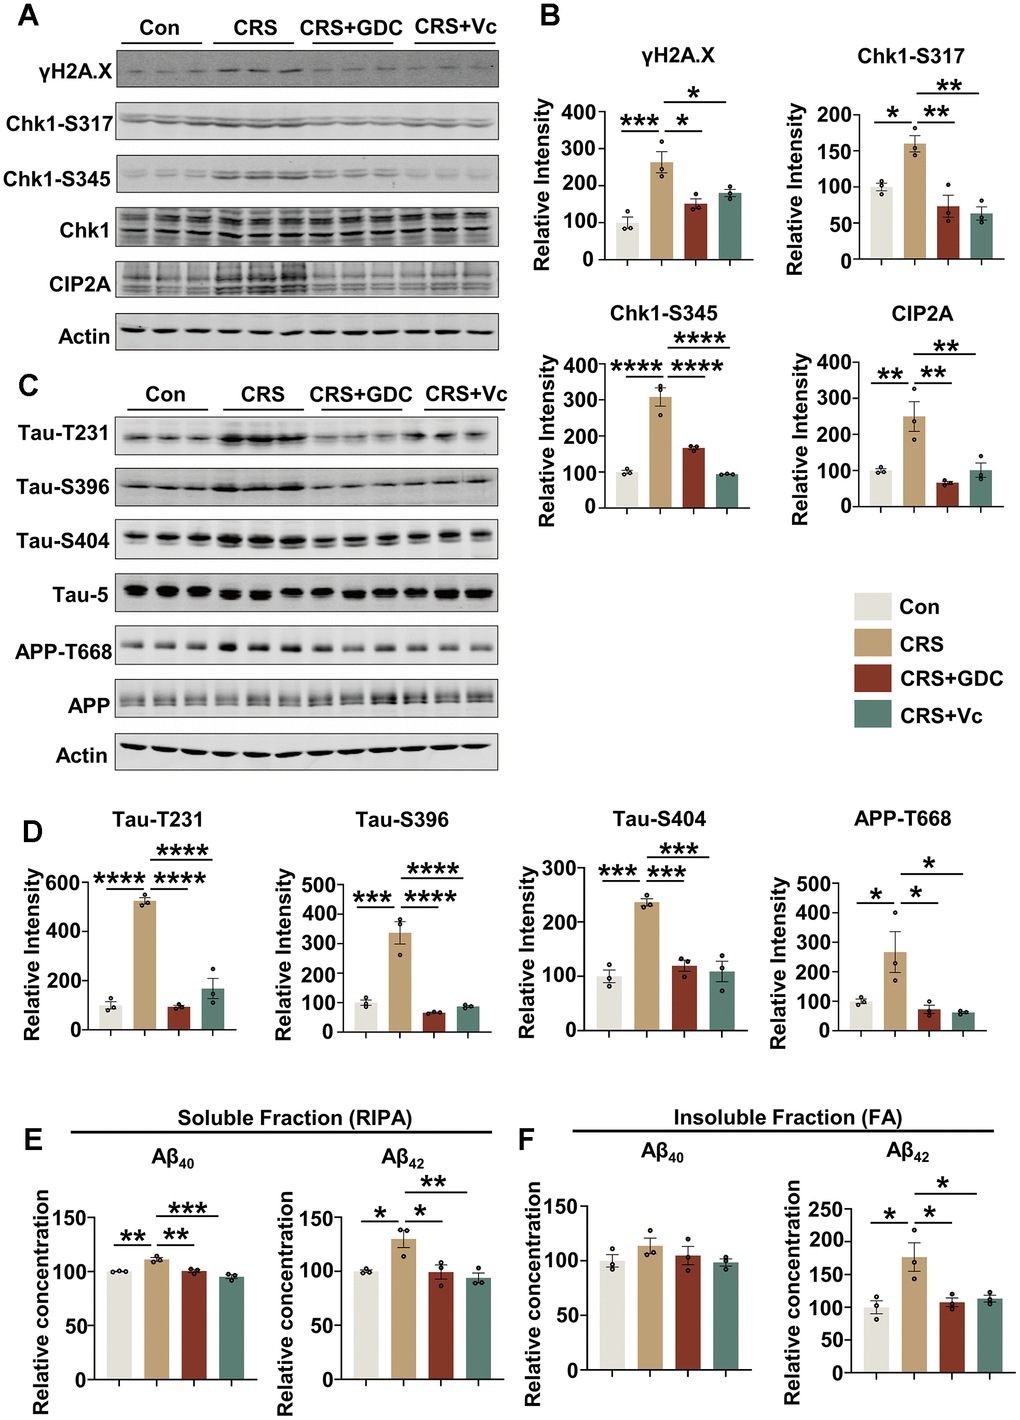 Vitamin C and Chk1 inhibitor reduce DNA damage, Chk1 activation and CIP2A expression, decrease tau phosphorylation and Aβ levels in hippocampus of mice exposed to chronic stress. (A) Representative immunoblots of γH2A.X, Chk1-pS317, Chk1-pS345, Chk1, CIP2A, β-actin in hippocampal tissues of mice in different groups. (B) Quantification of the relative protein levels; non-phosphorylated proteins such as γH2A.X and CIP2A were normalized to the β-actin levels; phosphorylated Chk1-pS317, Chk1-pS345 were normalized to total Chk1. n = 3 per group. (C) Representative immunoblots of Tau-pT231, Tau-pS396, Tau-pS404, Tau-5, APP-pT668, APP, β-actin in hippocampus of mice in different groups. (D) Quantification of the relative protein expression levels; phosphorylated Tau-pT231, Tau-pS396, Tau-pS404 and APP-pT668 were normalized to Tau-5 and total APP respectively. n = 3 per group. (E) The Aβ40 and Aβ42 in soluble fraction of hippocampal tissues in different groups were detected by ELISA kit. n = 3 per group. (F) The Aβ40 and Aβ42 in insoluble fraction of hippocampal tissues in different groups were detected by ELISA kit. n = 3 per group. All data represent mean ± SEM *PPP P 